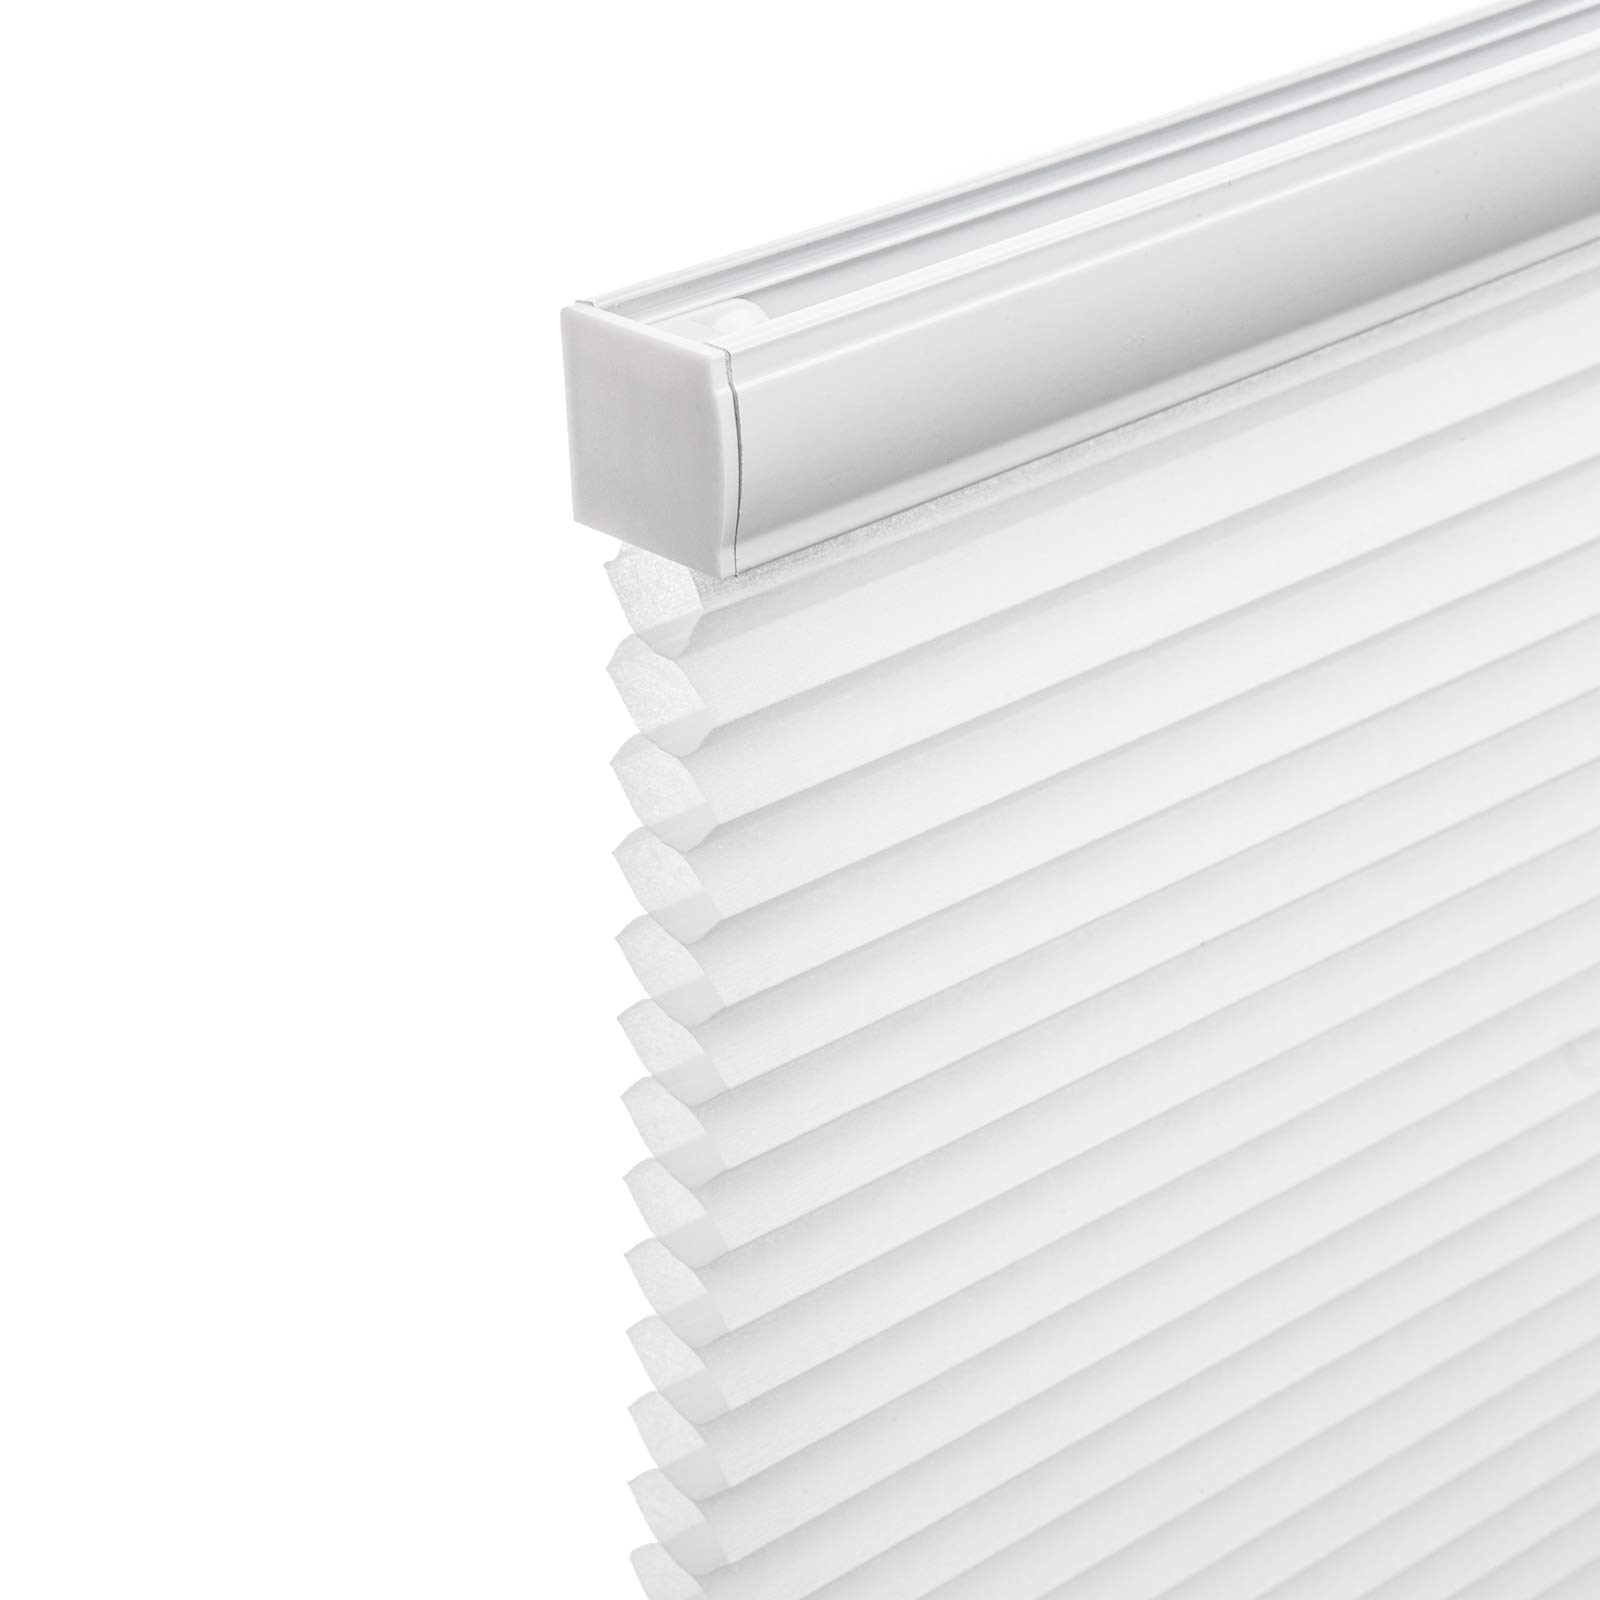 Cordless at Light Filtering Cellular Shade, Pleated Honeycomb Shade